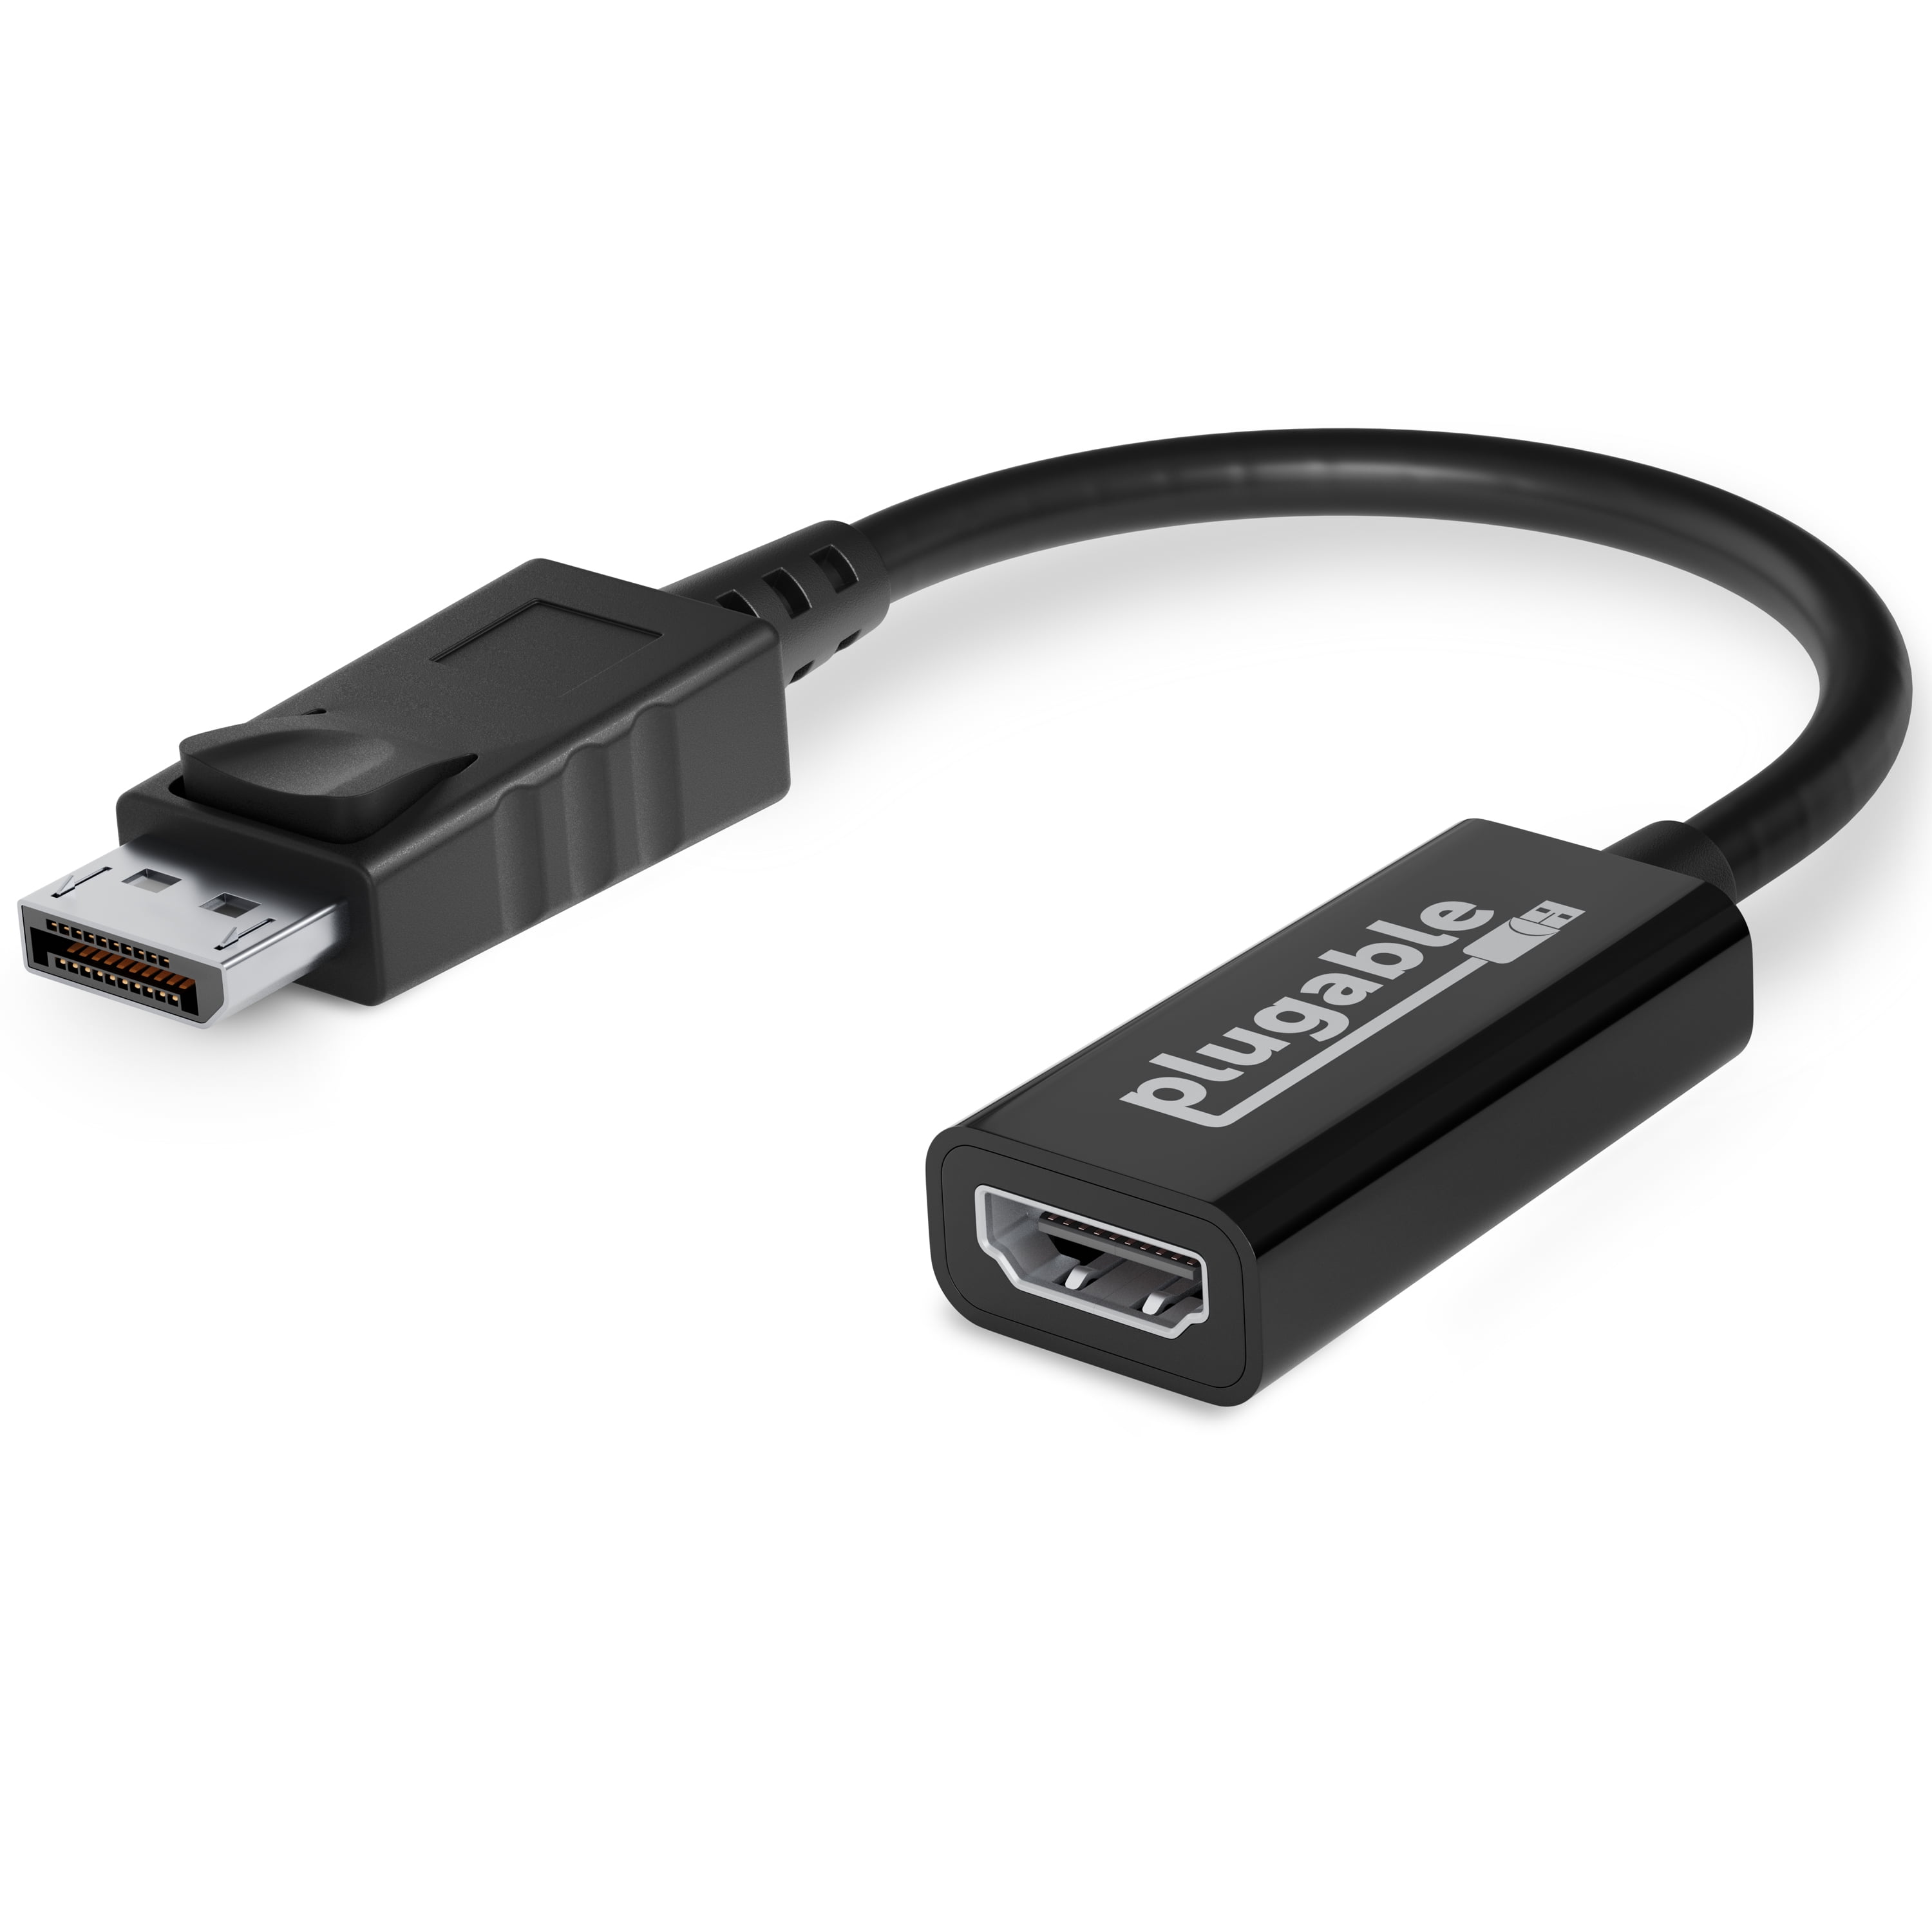 Plugable Active to Adapter - Connect any PC or Tablet to an HDMI Enabled Monitor, TV or Projector for Ultra-HD Video Streaming (HDMI 2.0 up to 4K 3840x2160 -